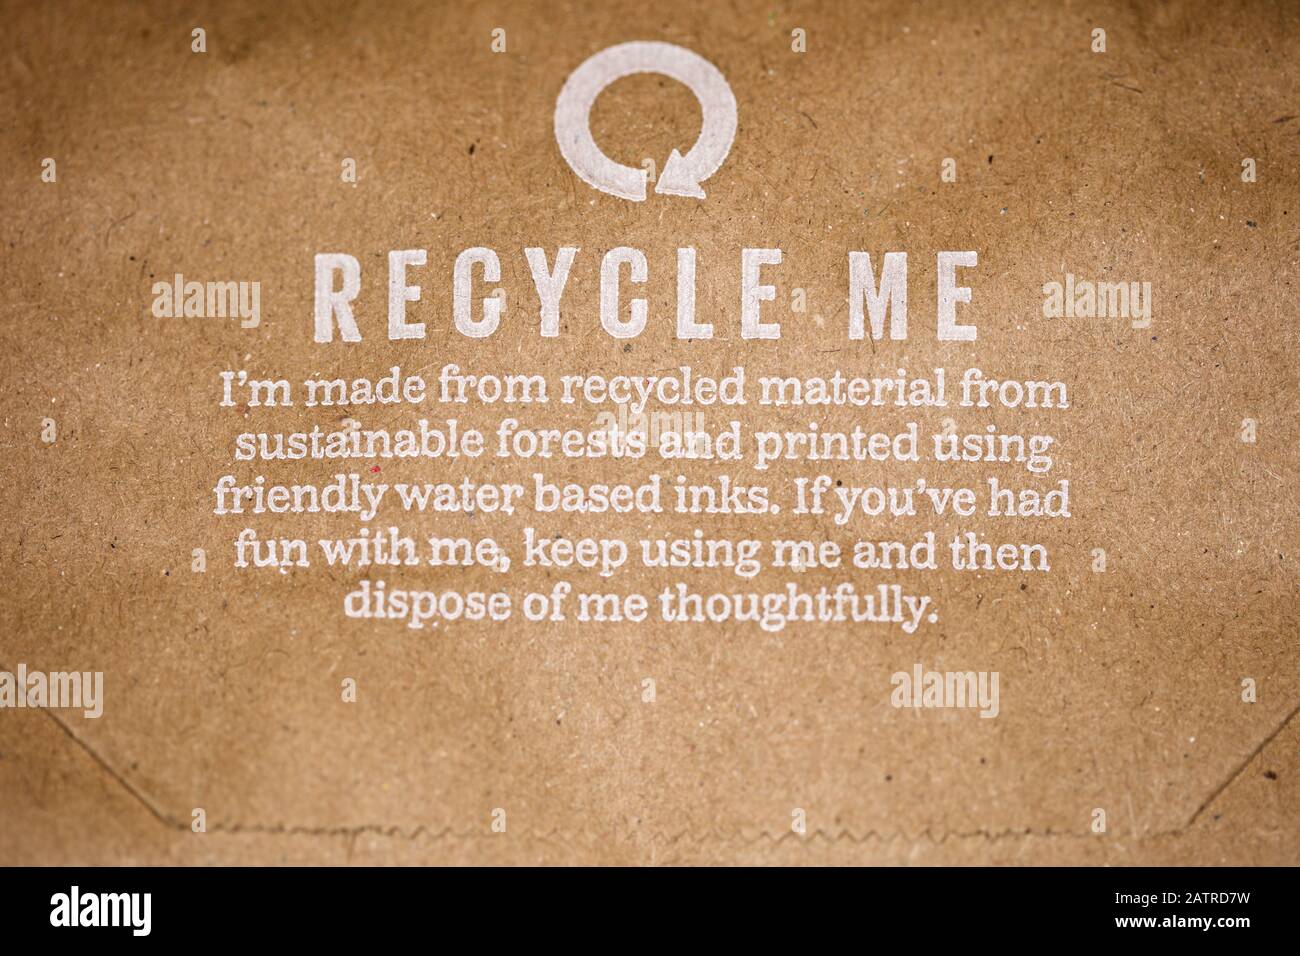 Recycle me message on a brown paper bag Stock Photo - Alamy